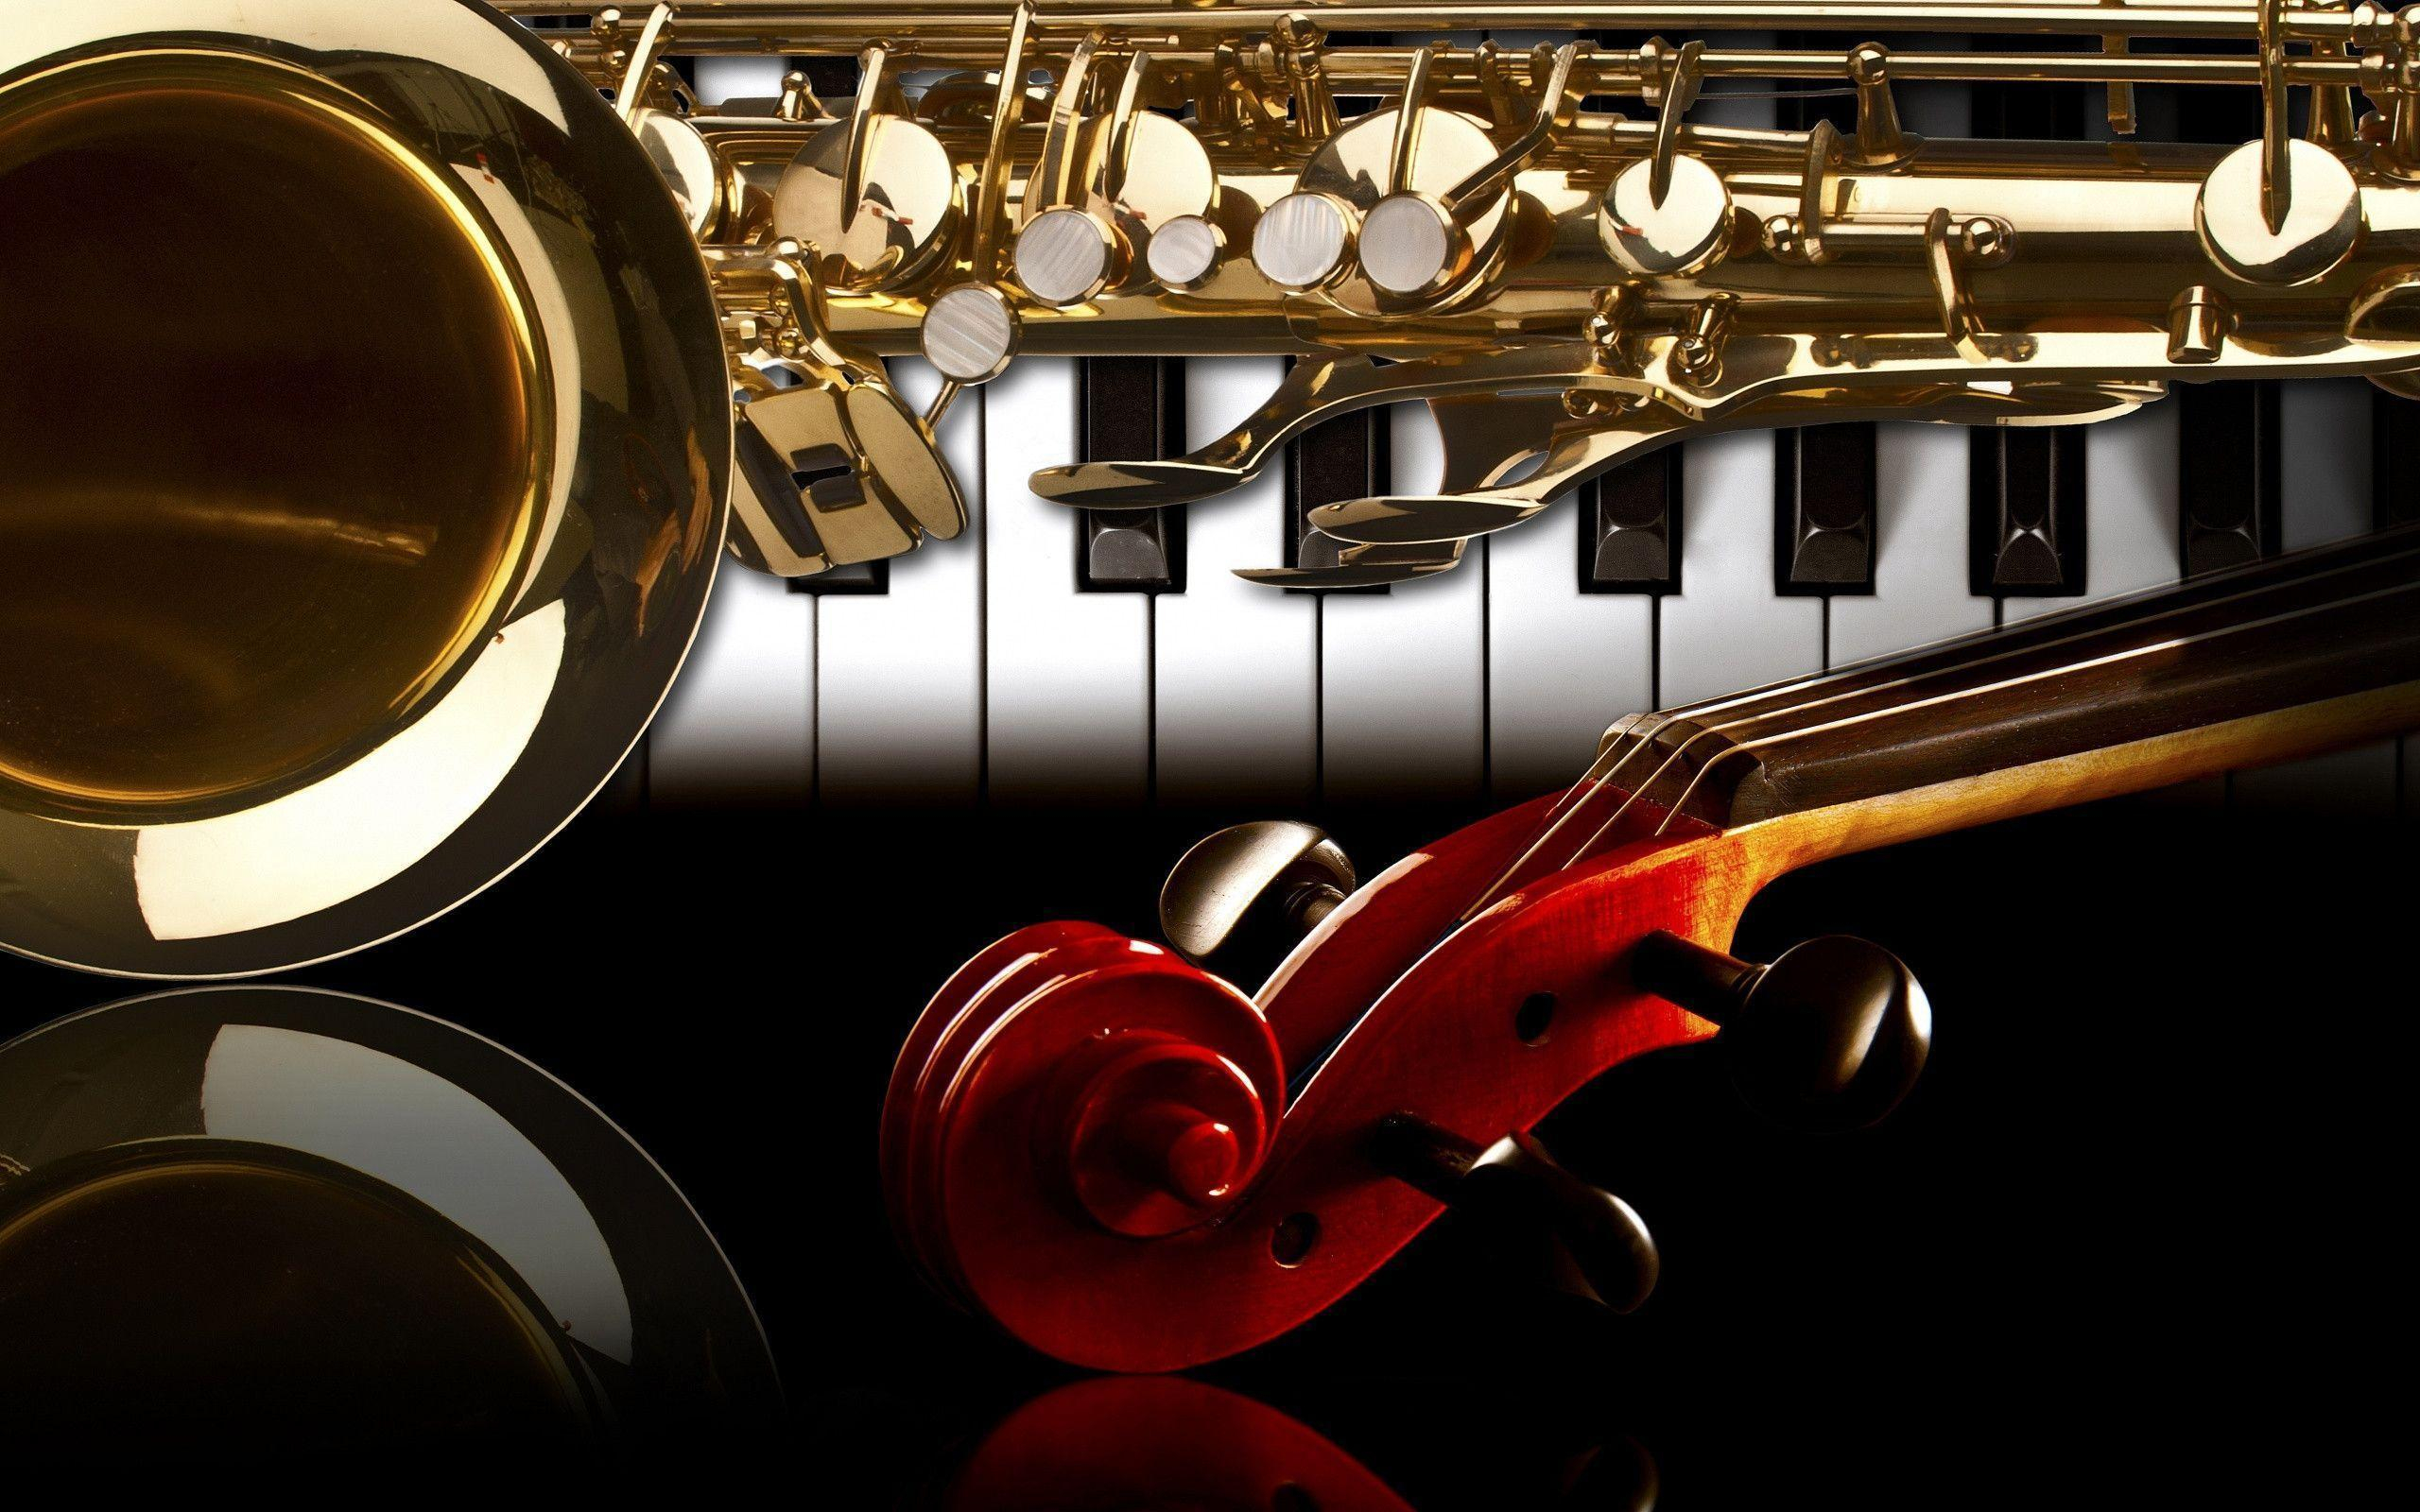 2560x1600 Musical Instrument Wallpapers